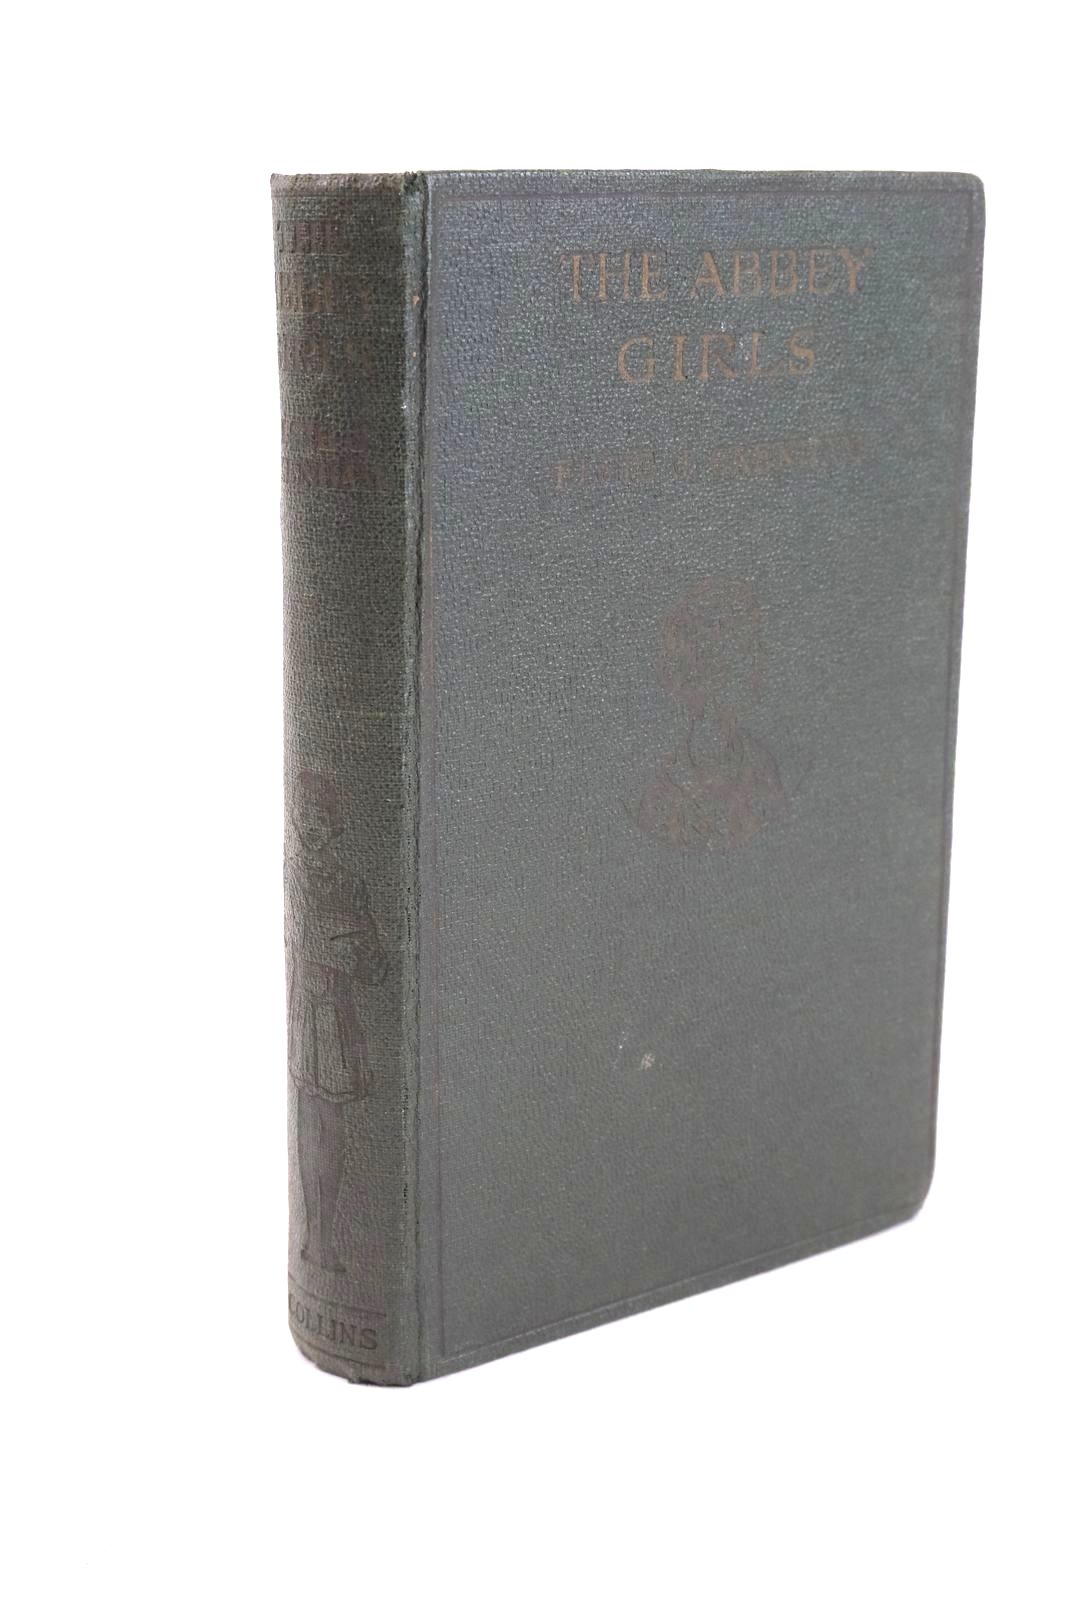 Photo of THE ABBEY GIRLS written by Oxenham, Elsie J. illustrated by Robinson, Charles et al., published by Collins Clear-Type Press (STOCK CODE: 1327251)  for sale by Stella & Rose's Books